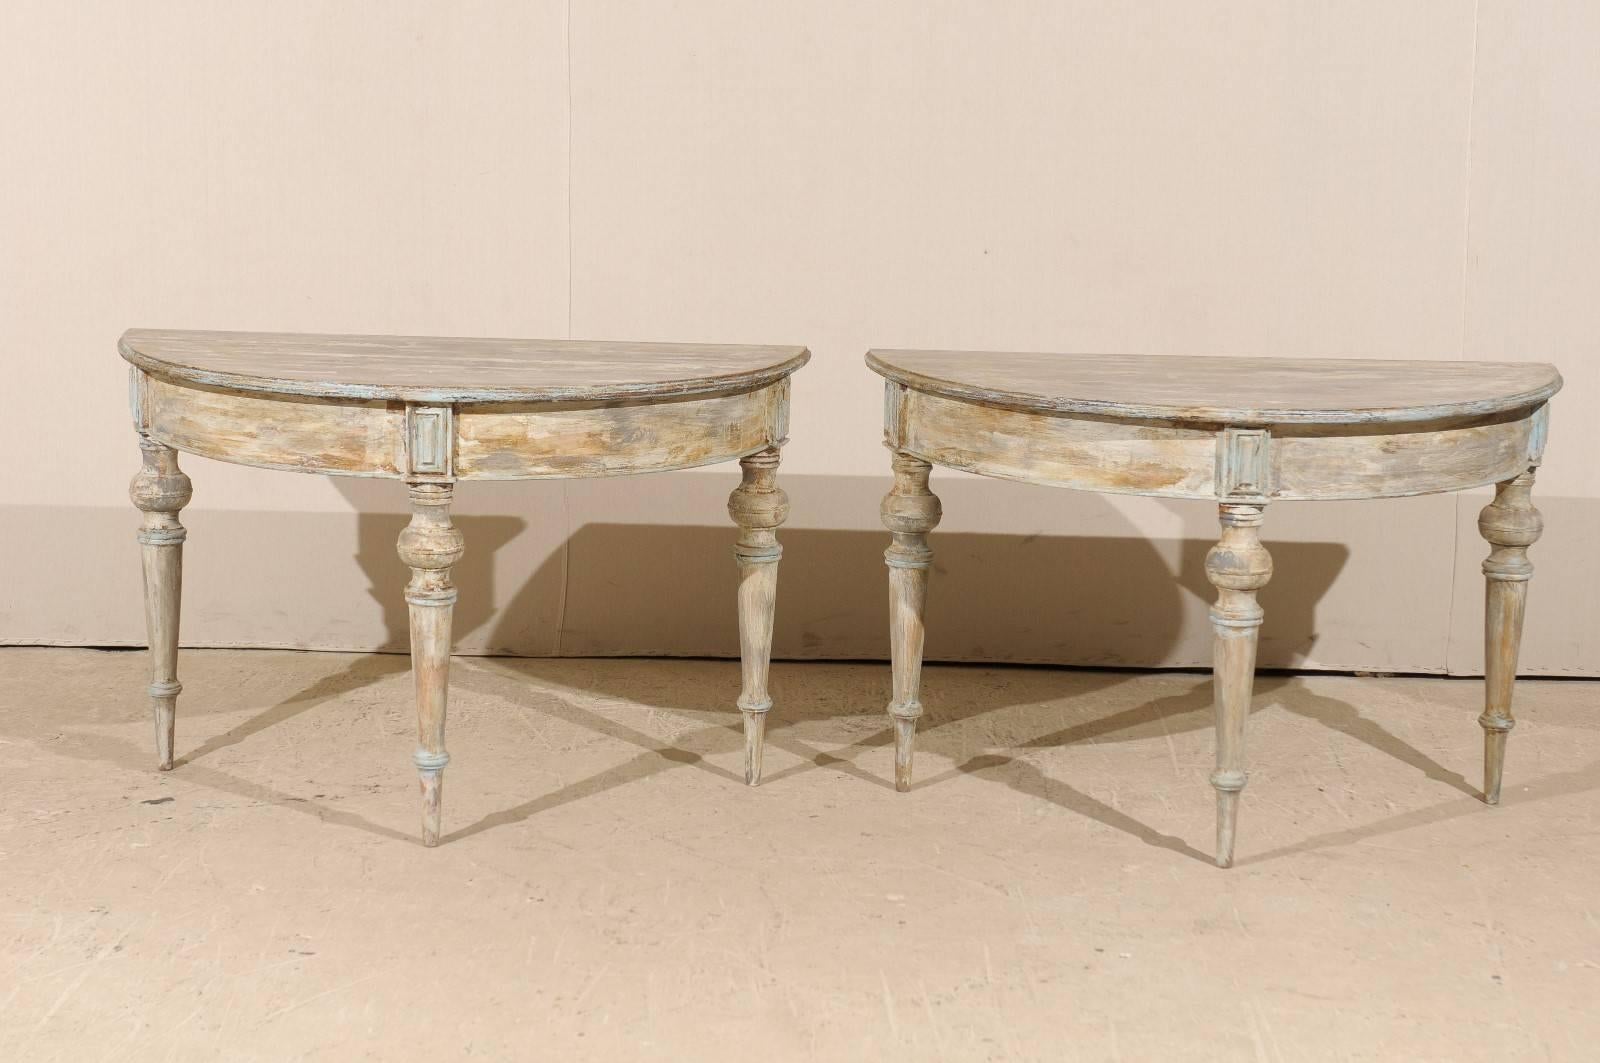 A pair of 19th century Swedish demilune tables. This pair of painted wood demilune tables features half moon tops over circular aprons. The pair is raised on turned and tapered legs. These half moon tables are an overall taupe color with a cream